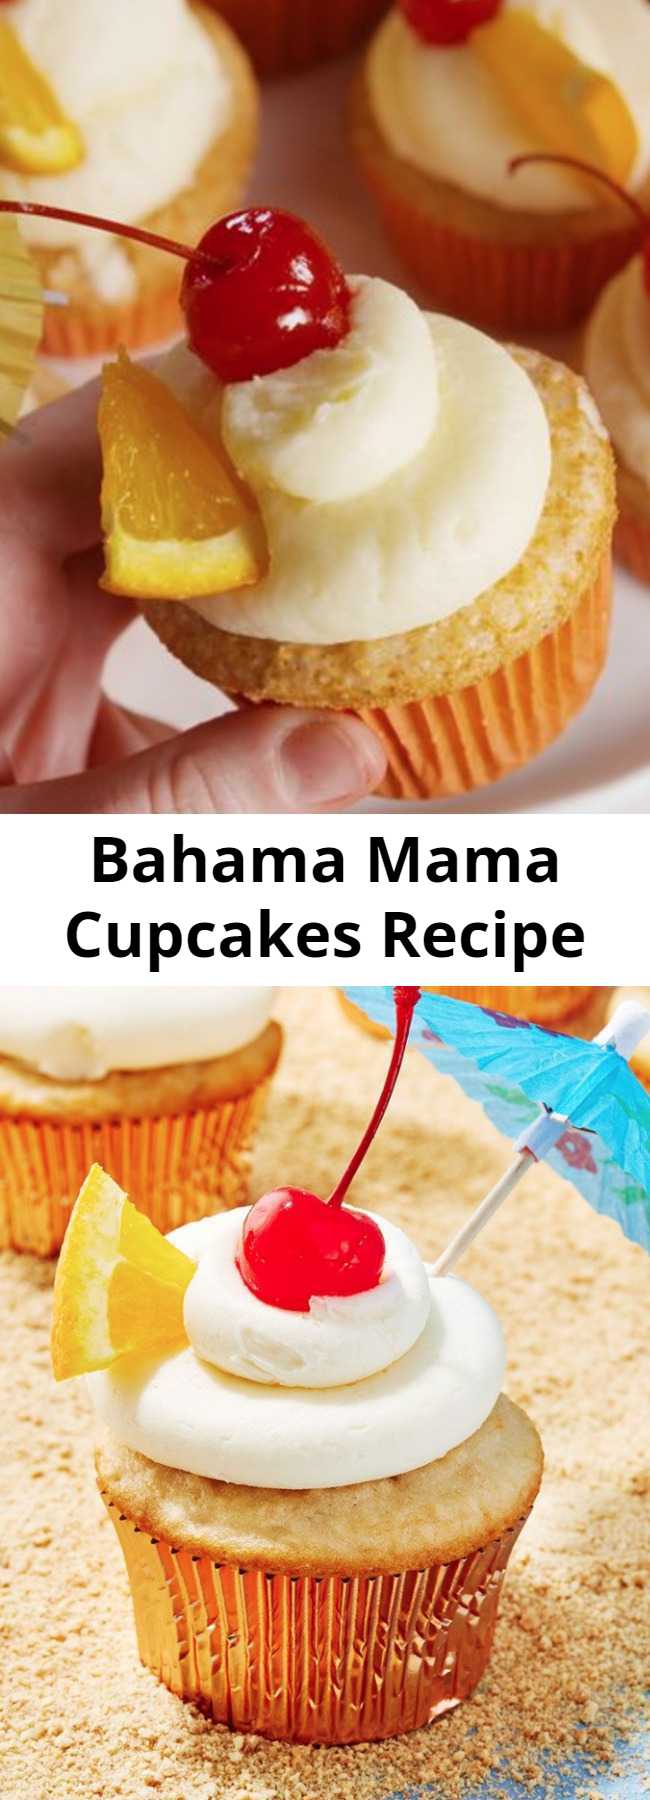 Bahama Mama Cupcakes Recipe - Bahama Mama cupcakes turn your favorite summertime drink into the perfect dessert. One bite and you'll feel like you've had the beach vacation of your dreams. #food #easyrecipe #baking #cupcakes #dessert